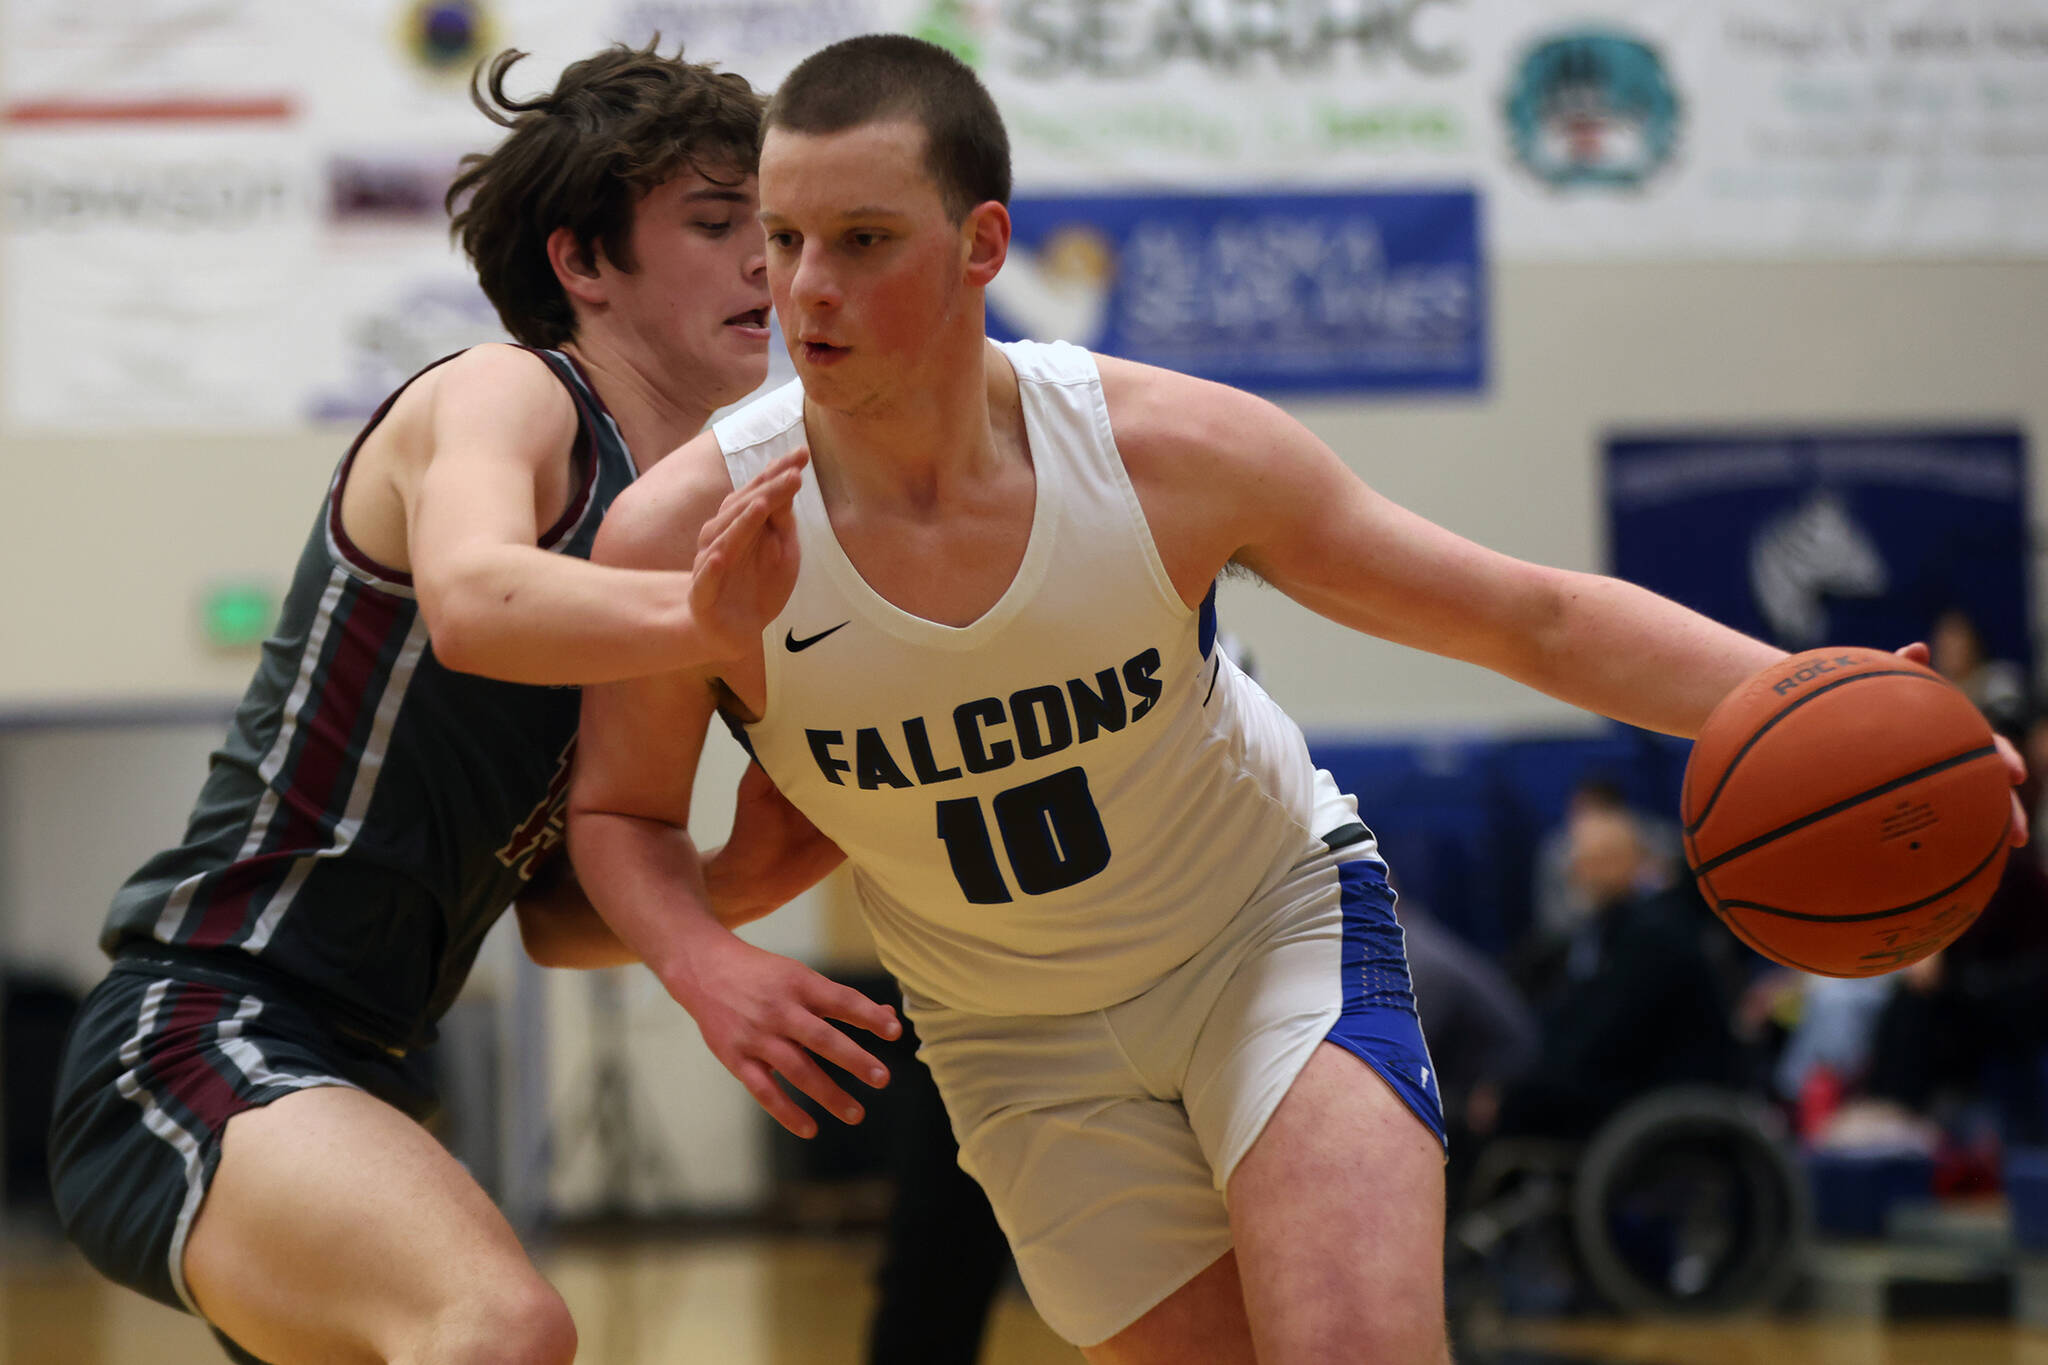 TMHS junior James Polasky (10) closes in on the hoop while Kayhi junior Jared Rhodes (15) works to close off that route. (Ben Hohenstatt / Juneau Empire)